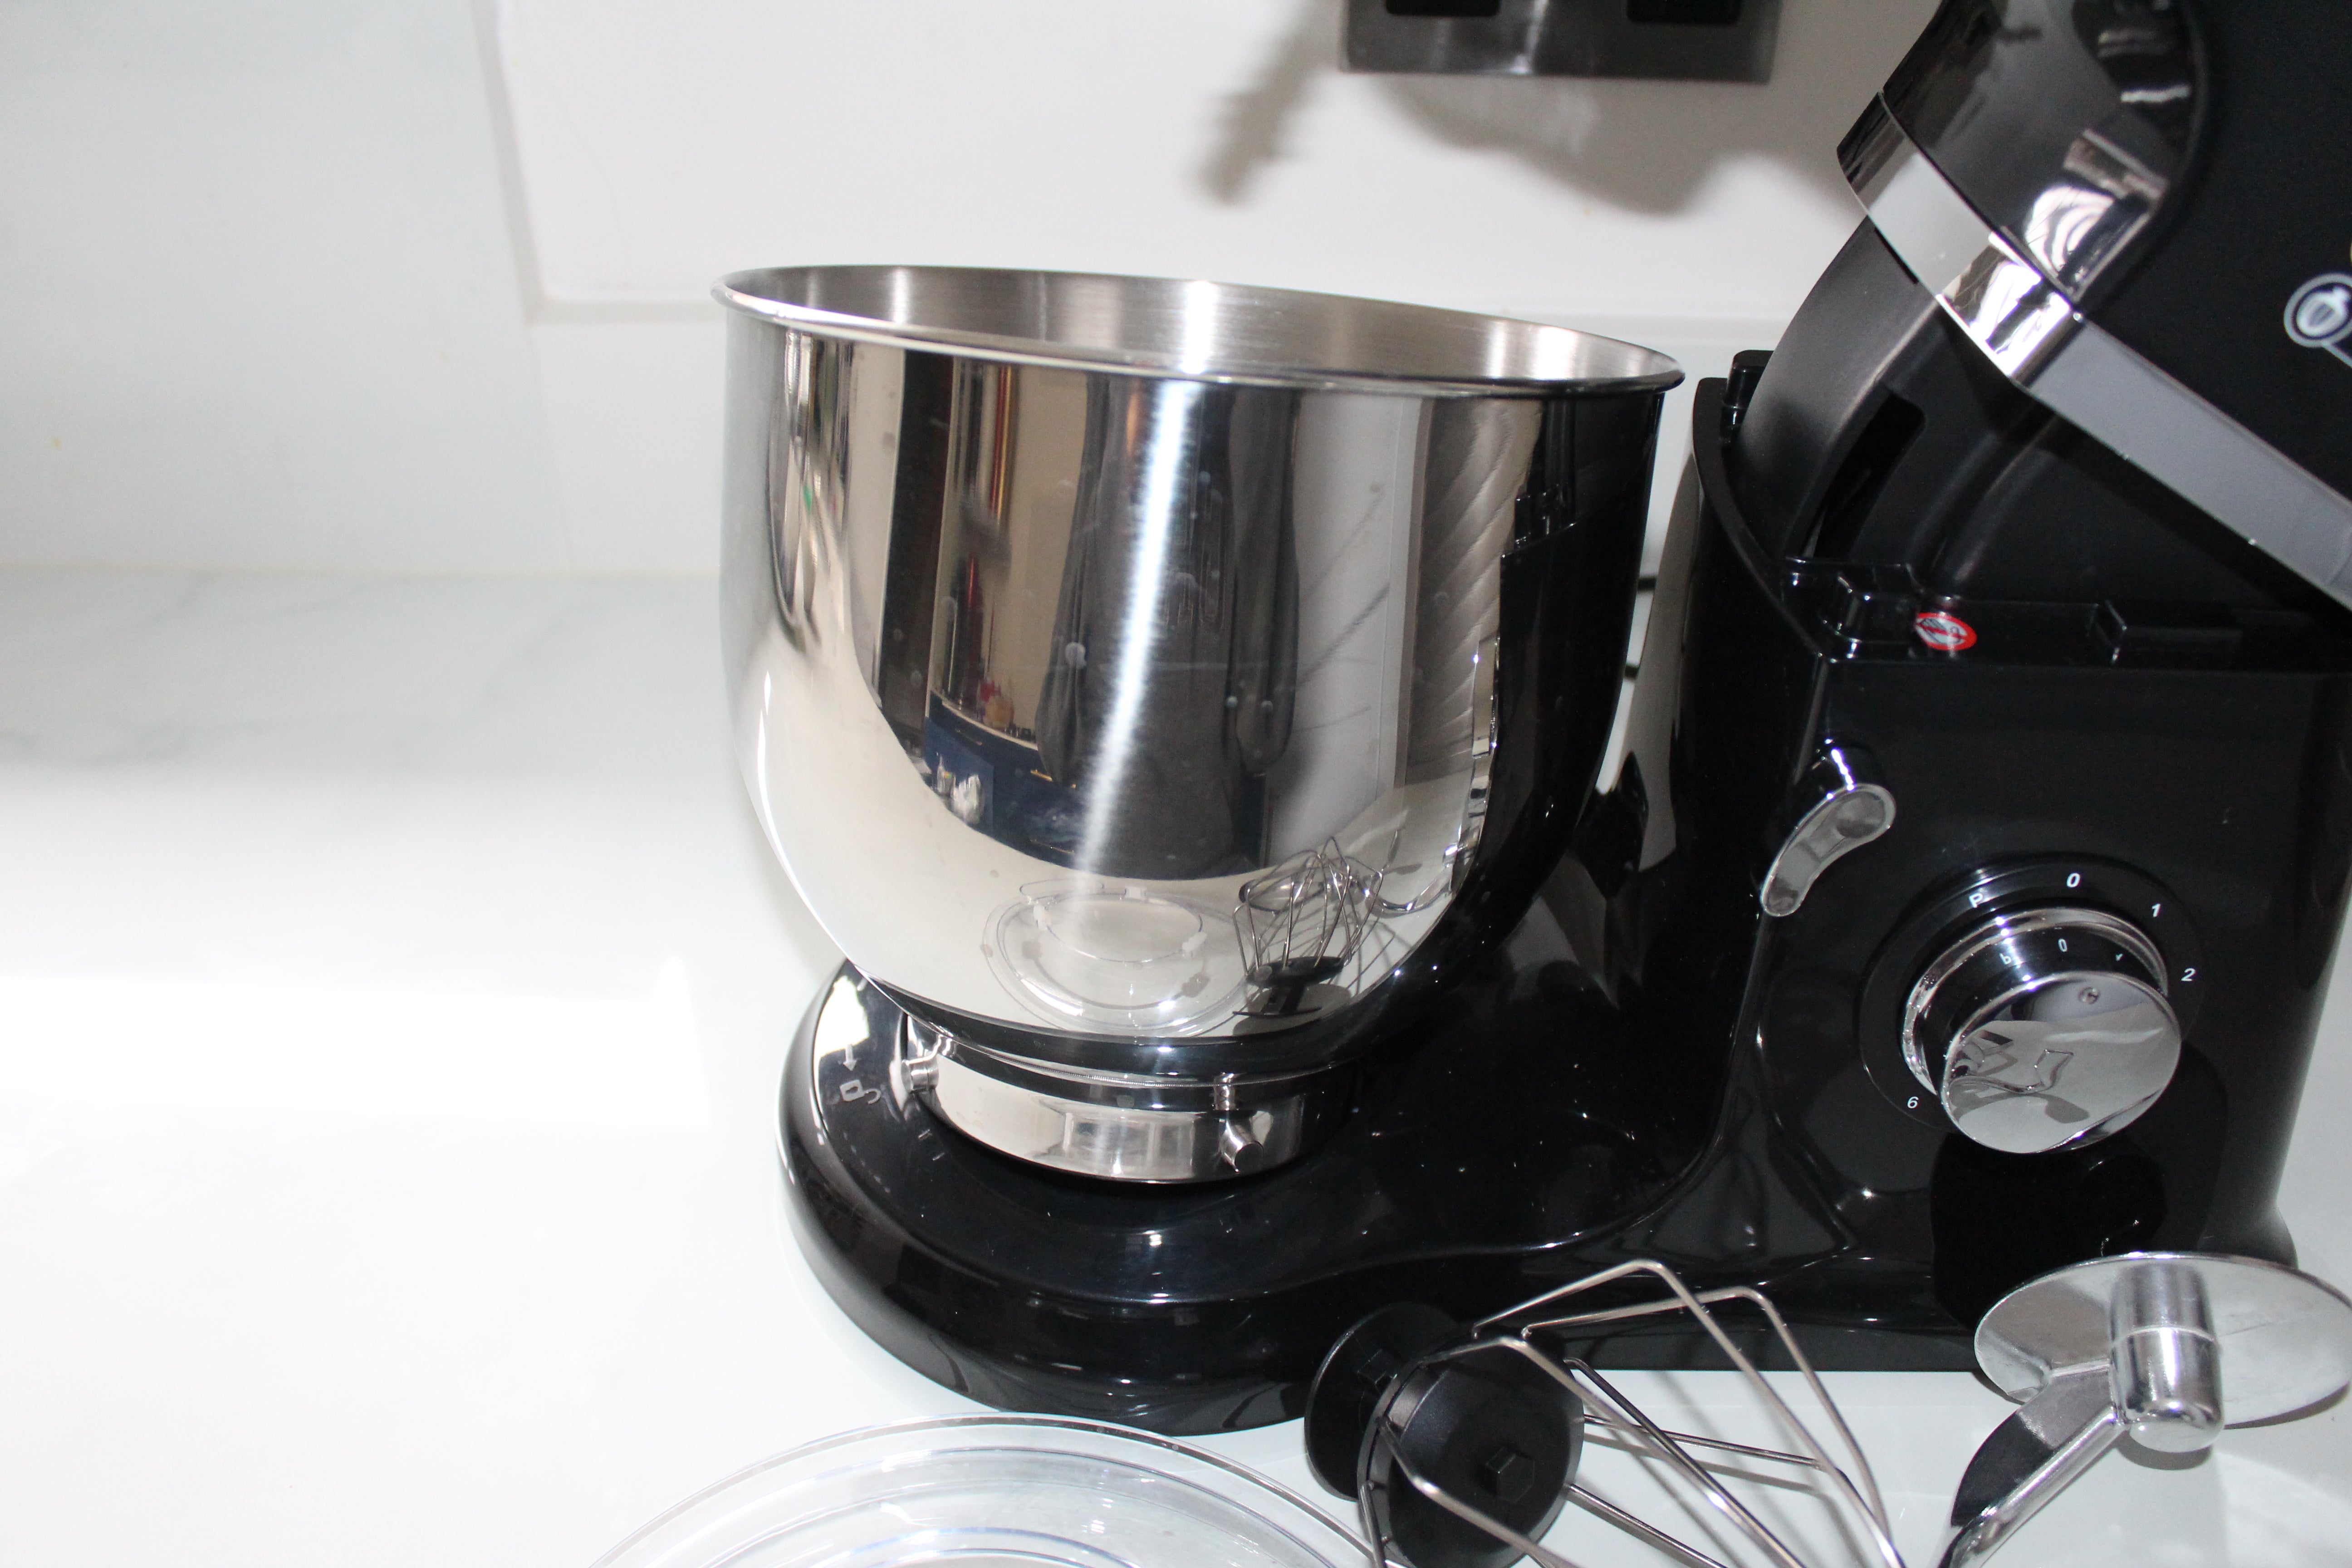 Vitinni 800W Stand Mixer with attachments on kitchen counter